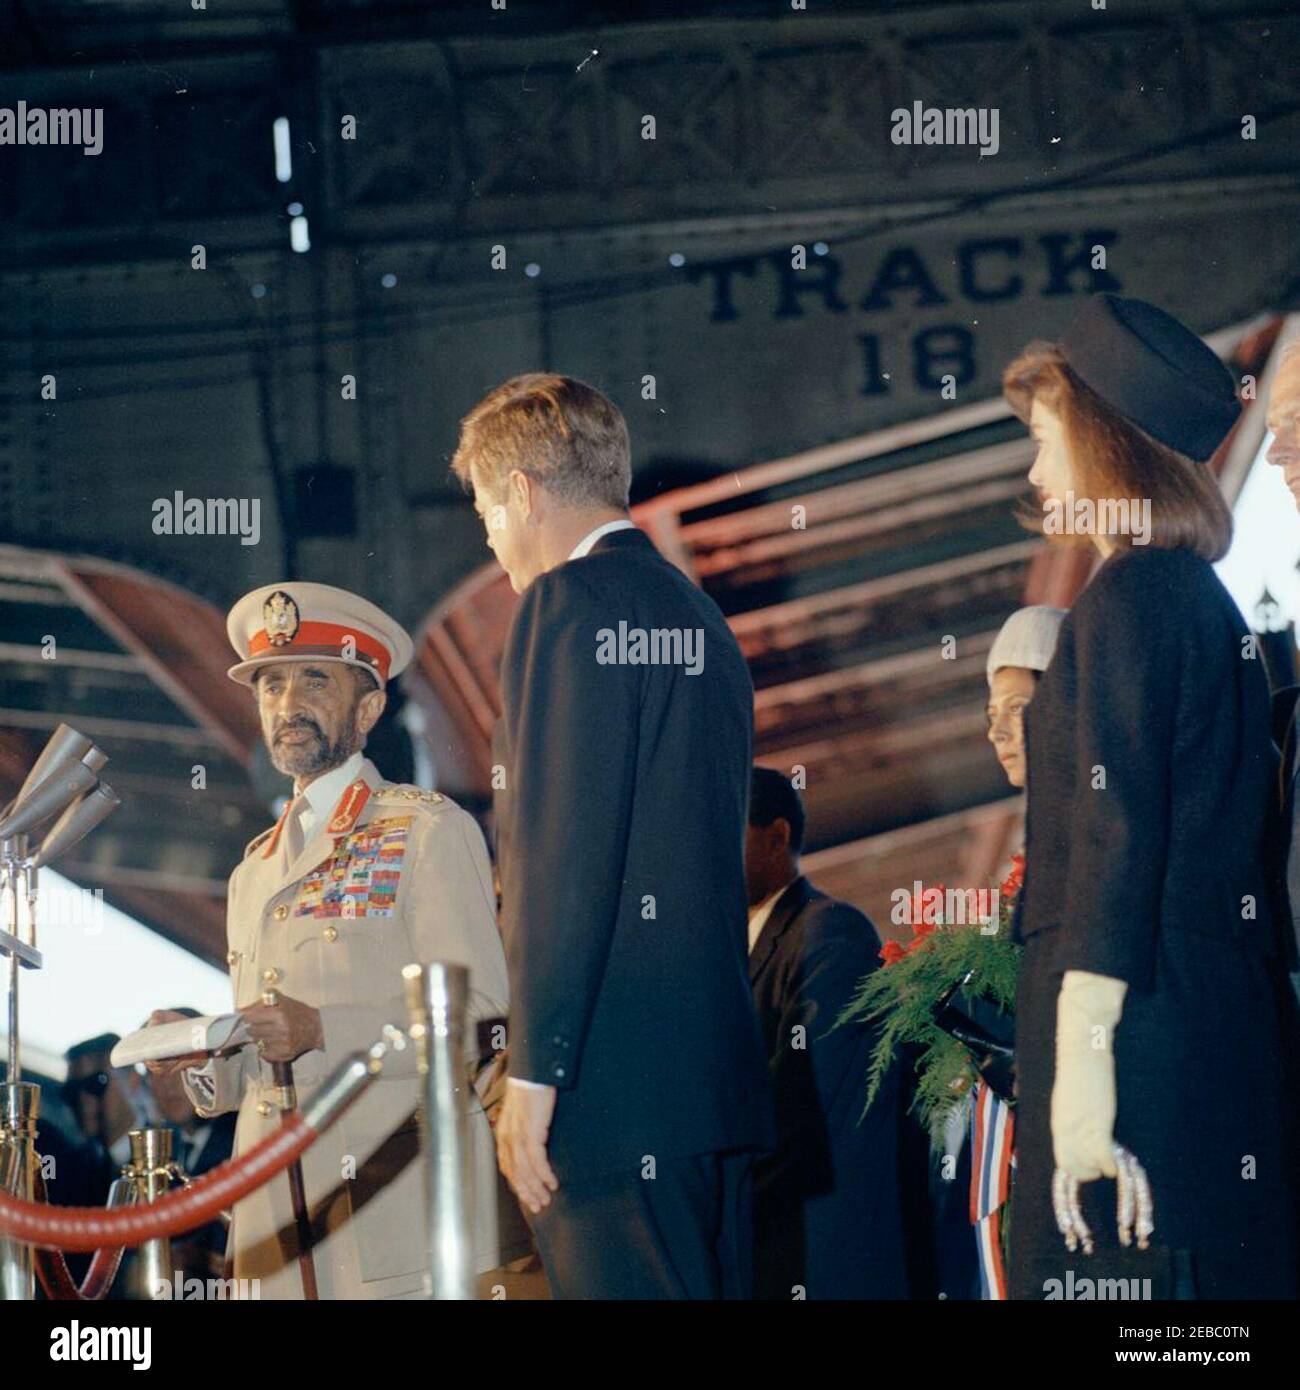 Arrival ceremony for Haile Selassie I, Emperor of Ethiopia, 12:00PM. Emperor of Ethiopia, Haile Selassie I, delivers remarks during an arrival ceremony in his honor; President John F. Kennedy observes. First Lady Jacqueline Kennedy and Princess Hirut u201cRuthu201d Desta, granddaughter of Emperor Selassie, stand at right; U.S. Under Secretary of State, George Ball, stands on far right edge of frame. Union Station, Washington, D.C. Stock Photo